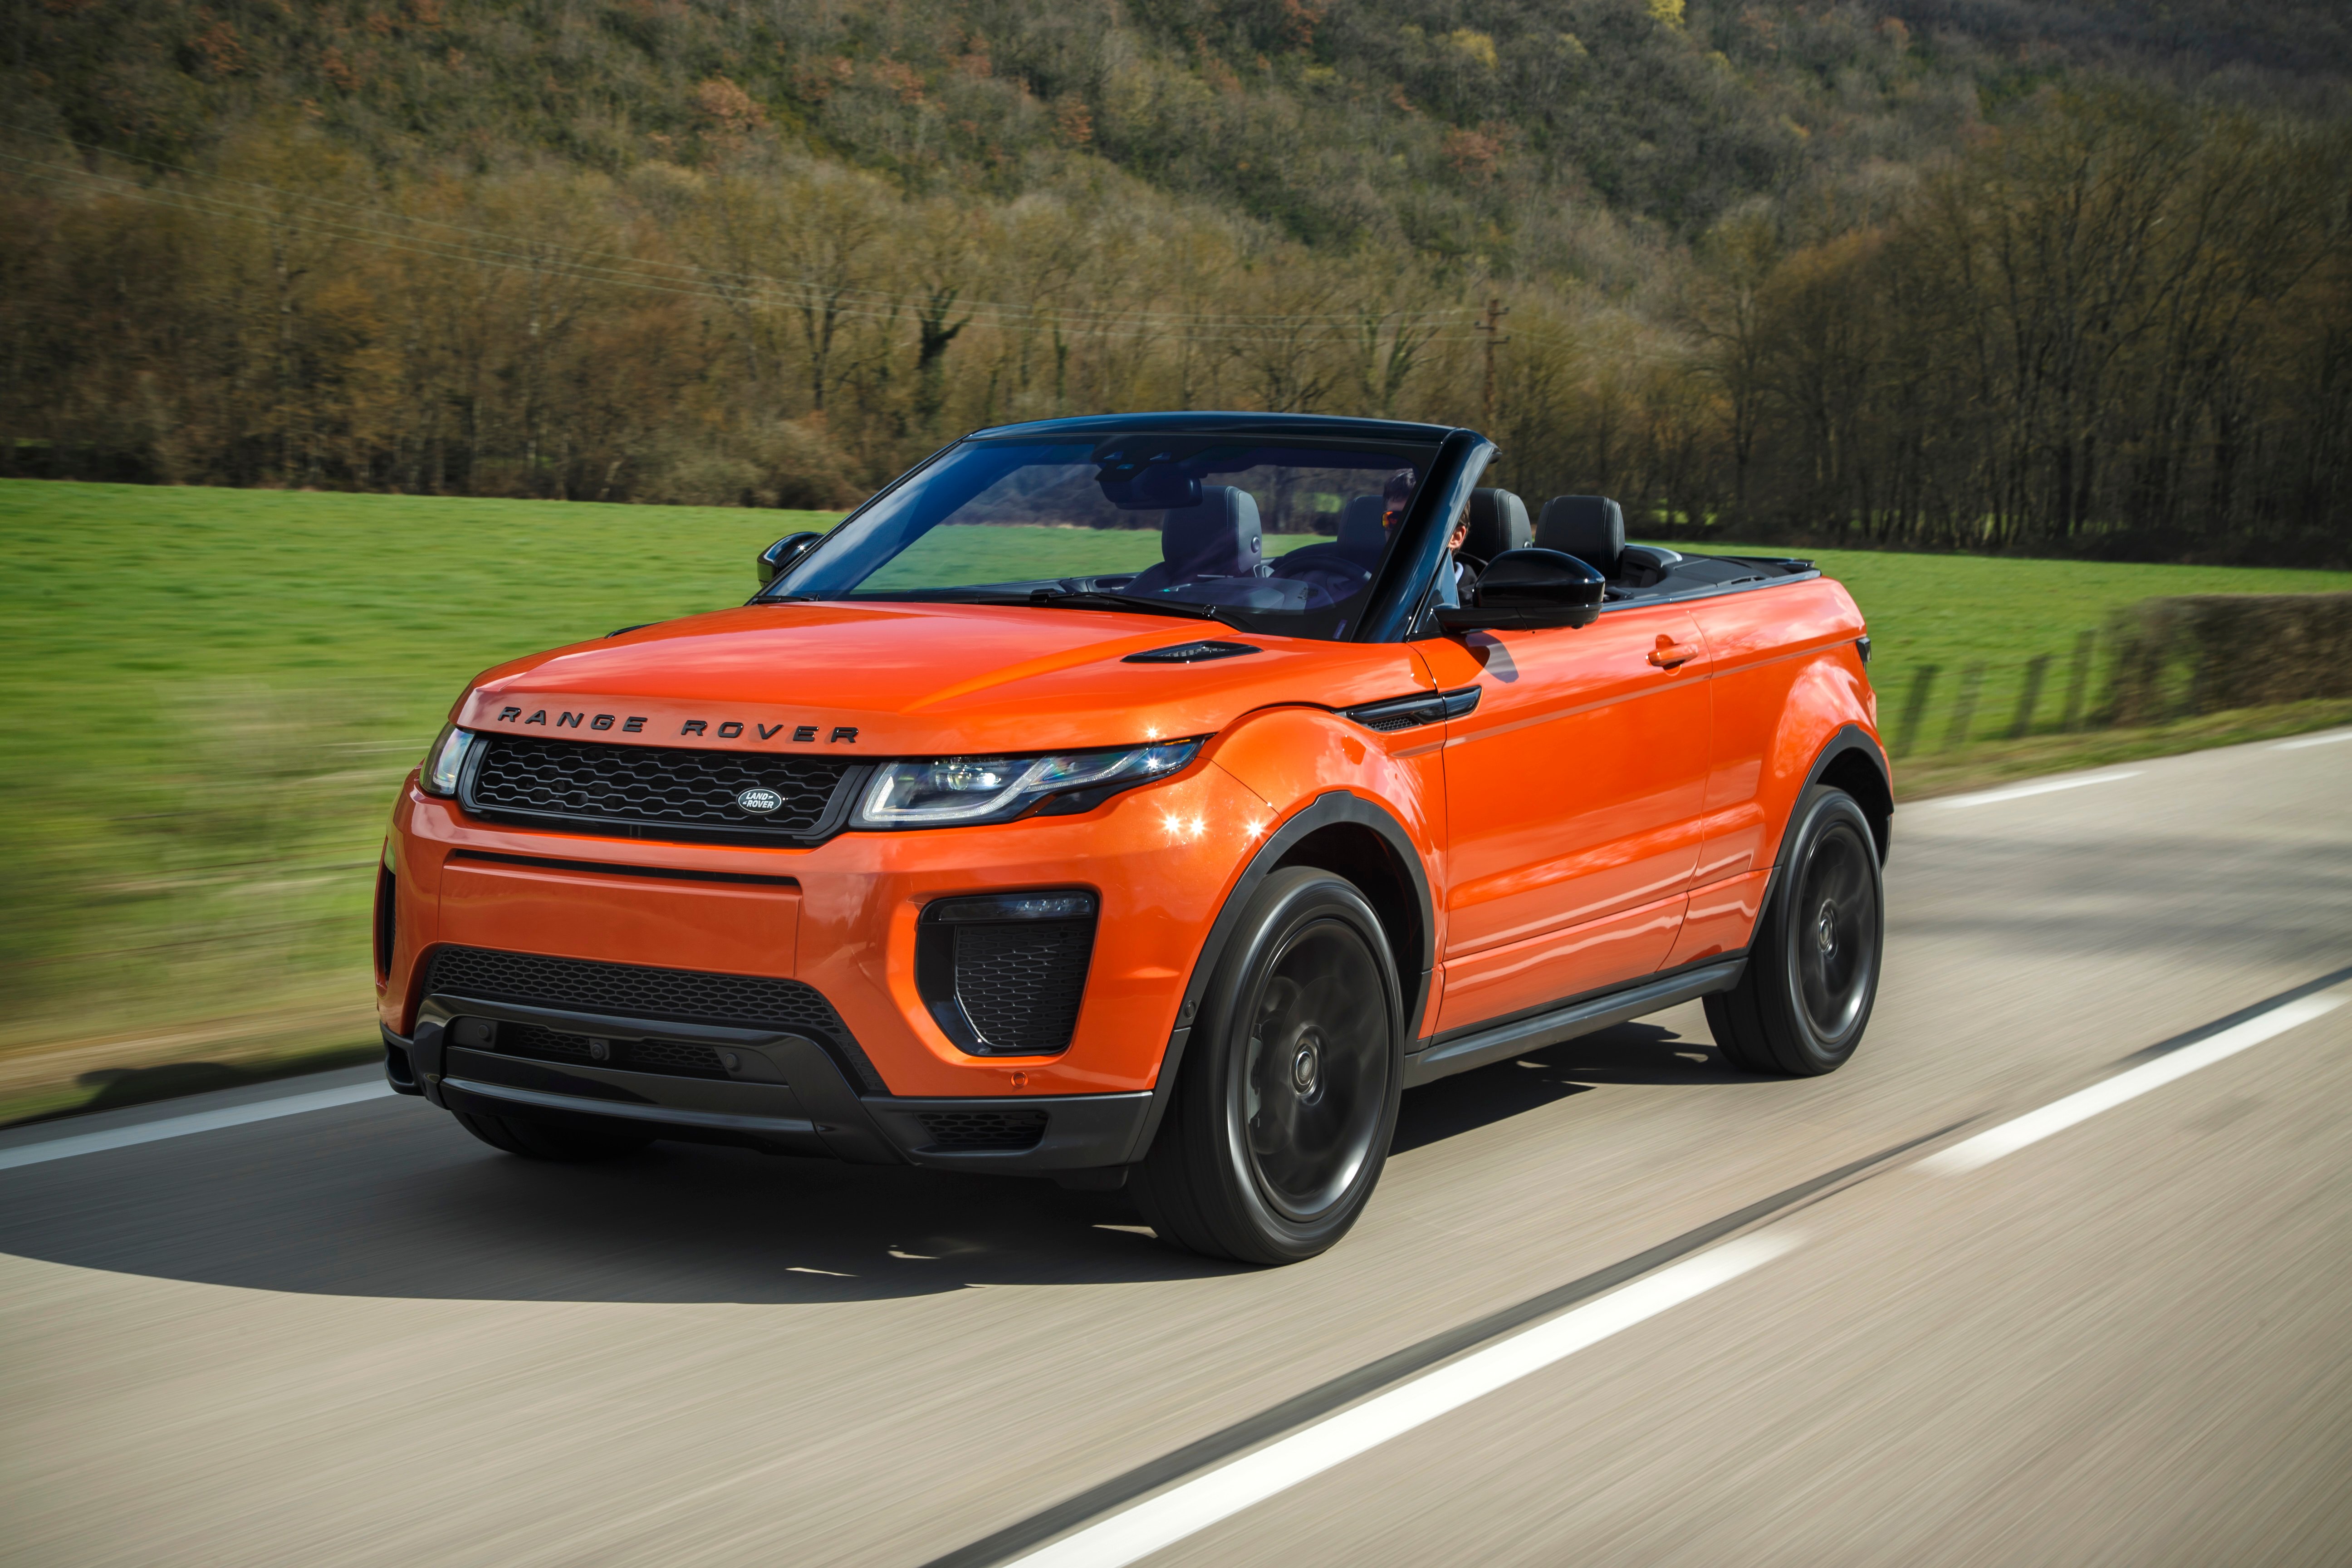 2017 Range Rover Evoque convertible pricing and